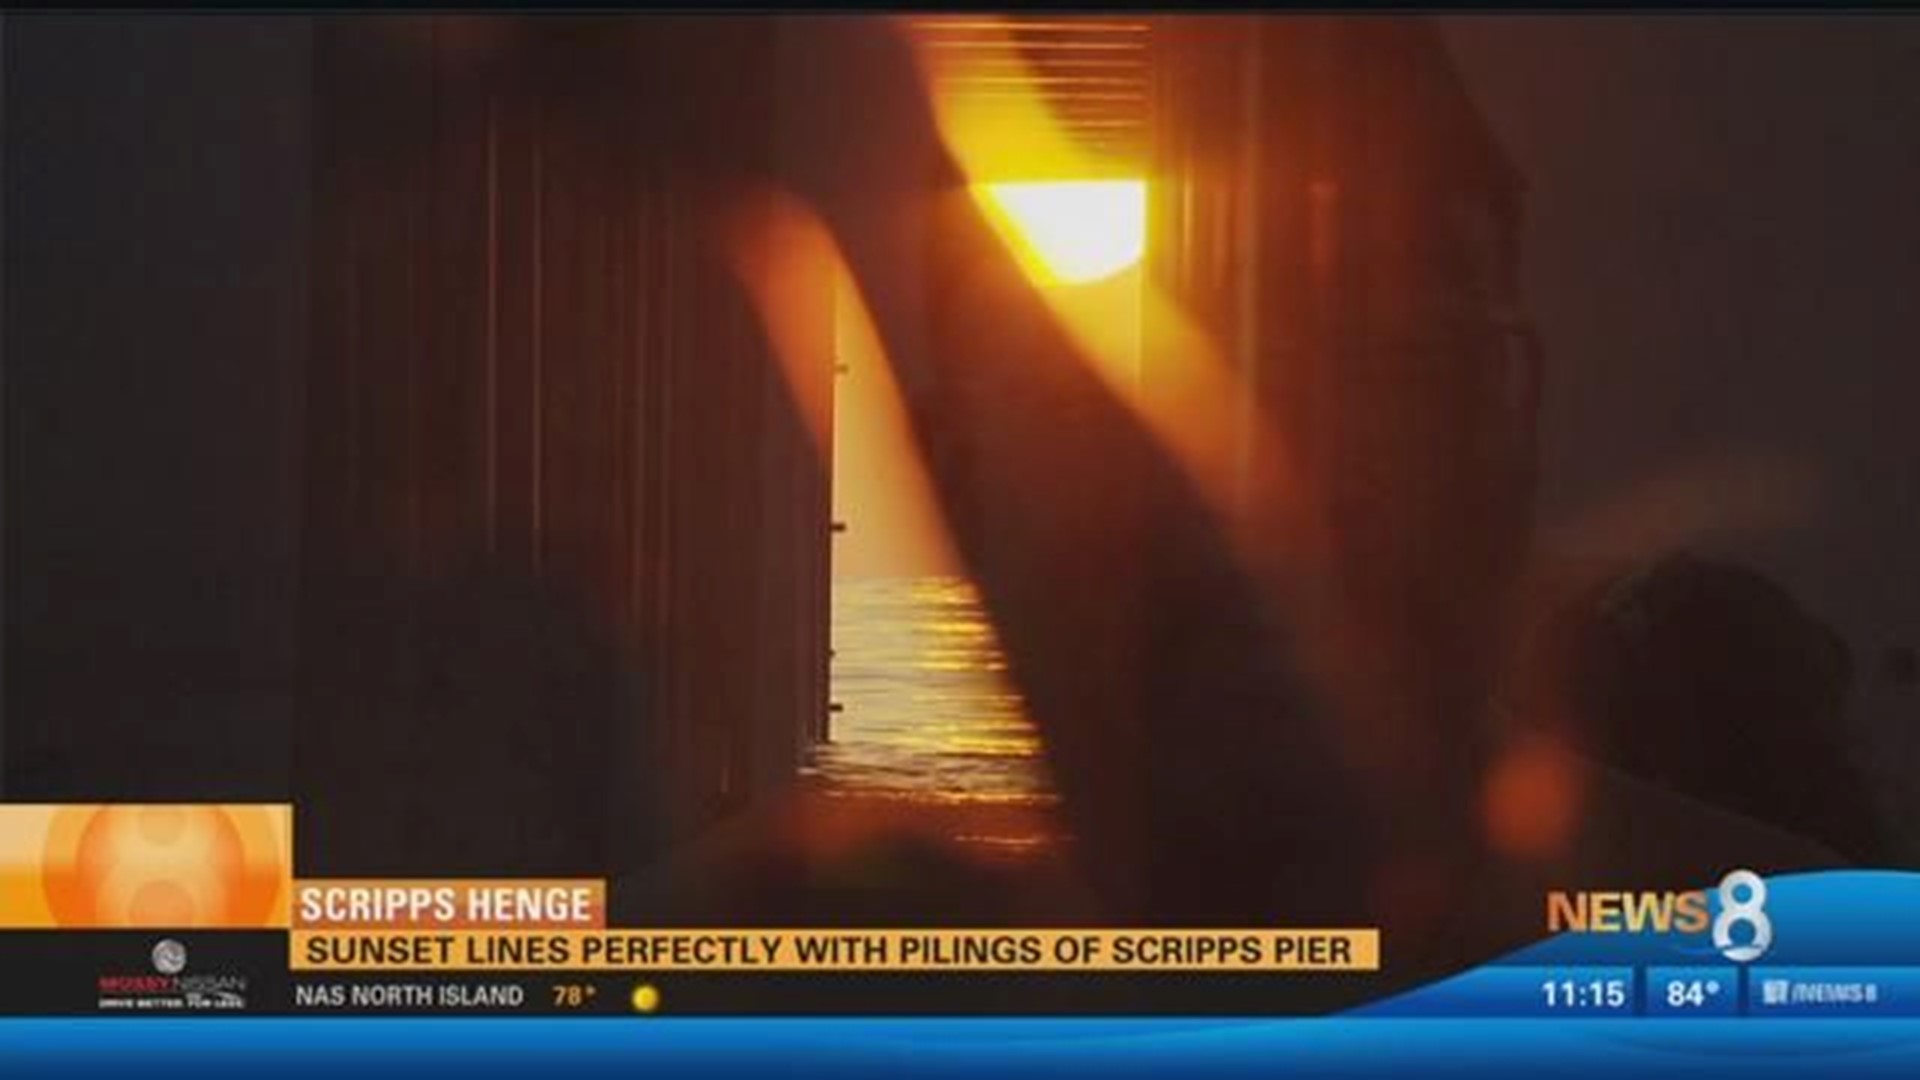 Scripps Henge Sunset lines up perfectly with pilings of Scripps Pier